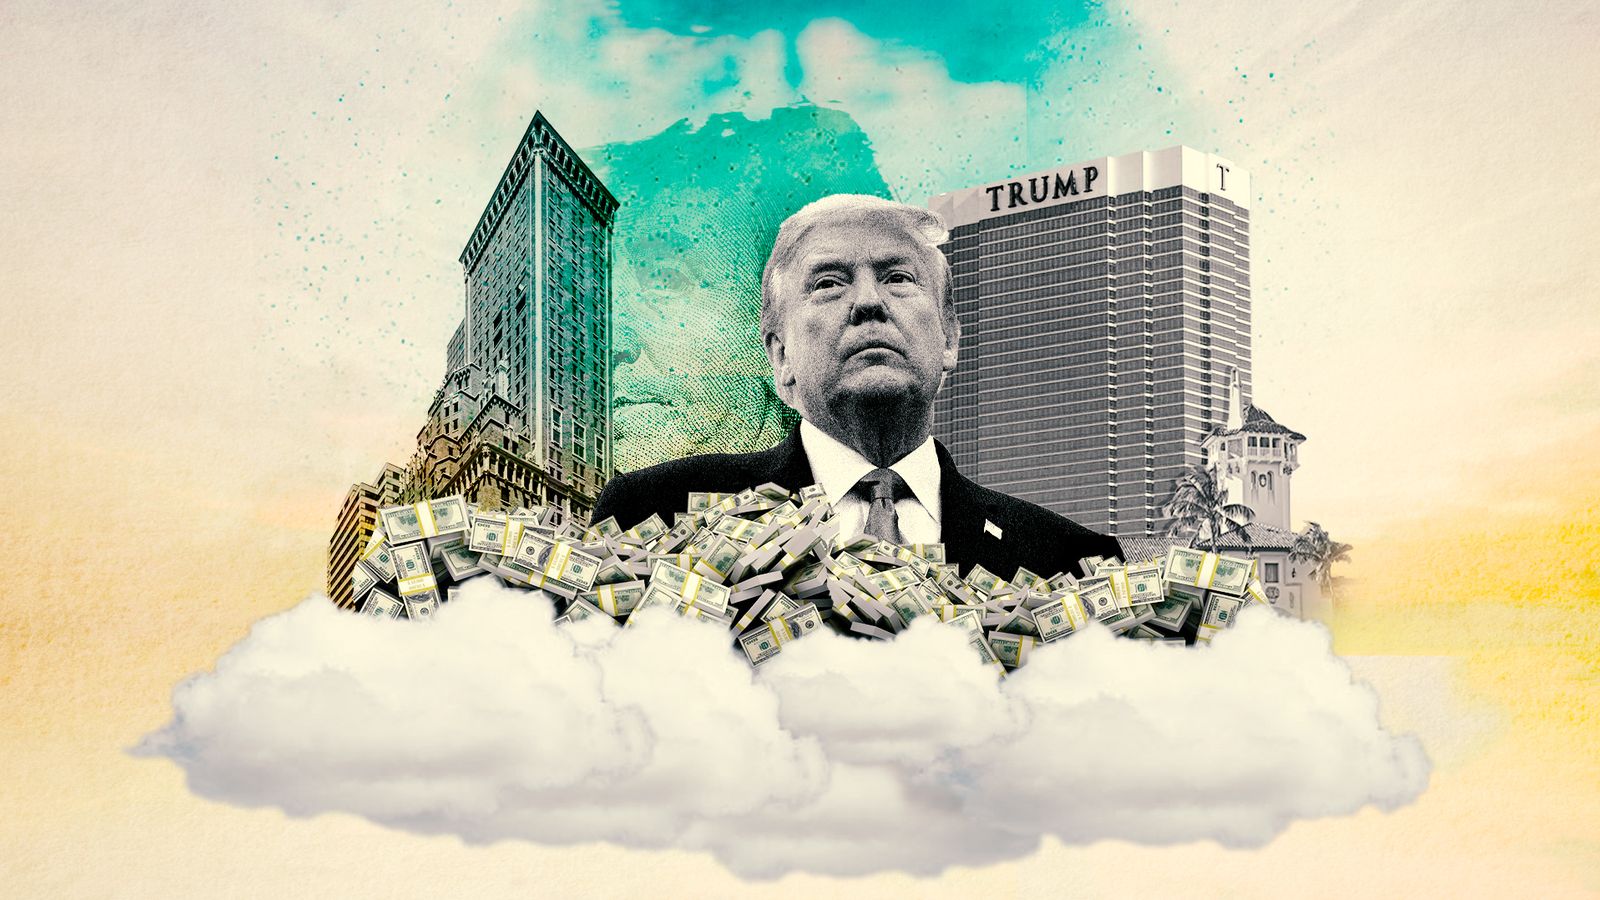 What are Donald Trump's biggest assets and how much does he claim they are worth?